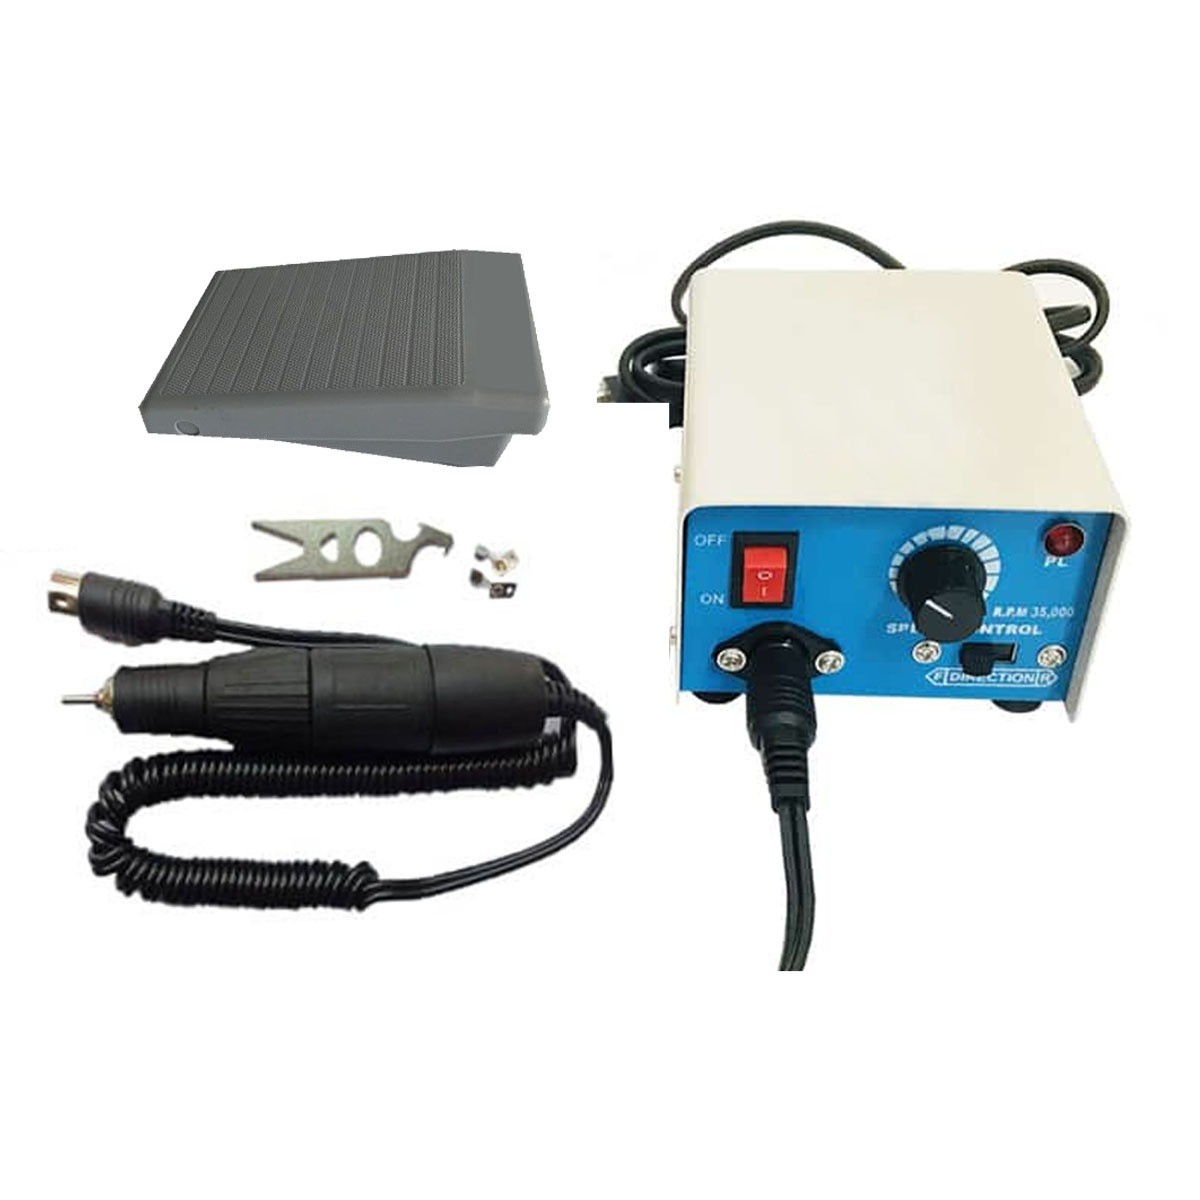 Buy Dental Lab Micromotor Handpiece With Control Box - 35000 RPM , Dental  Equipment Online in India - Dentmark